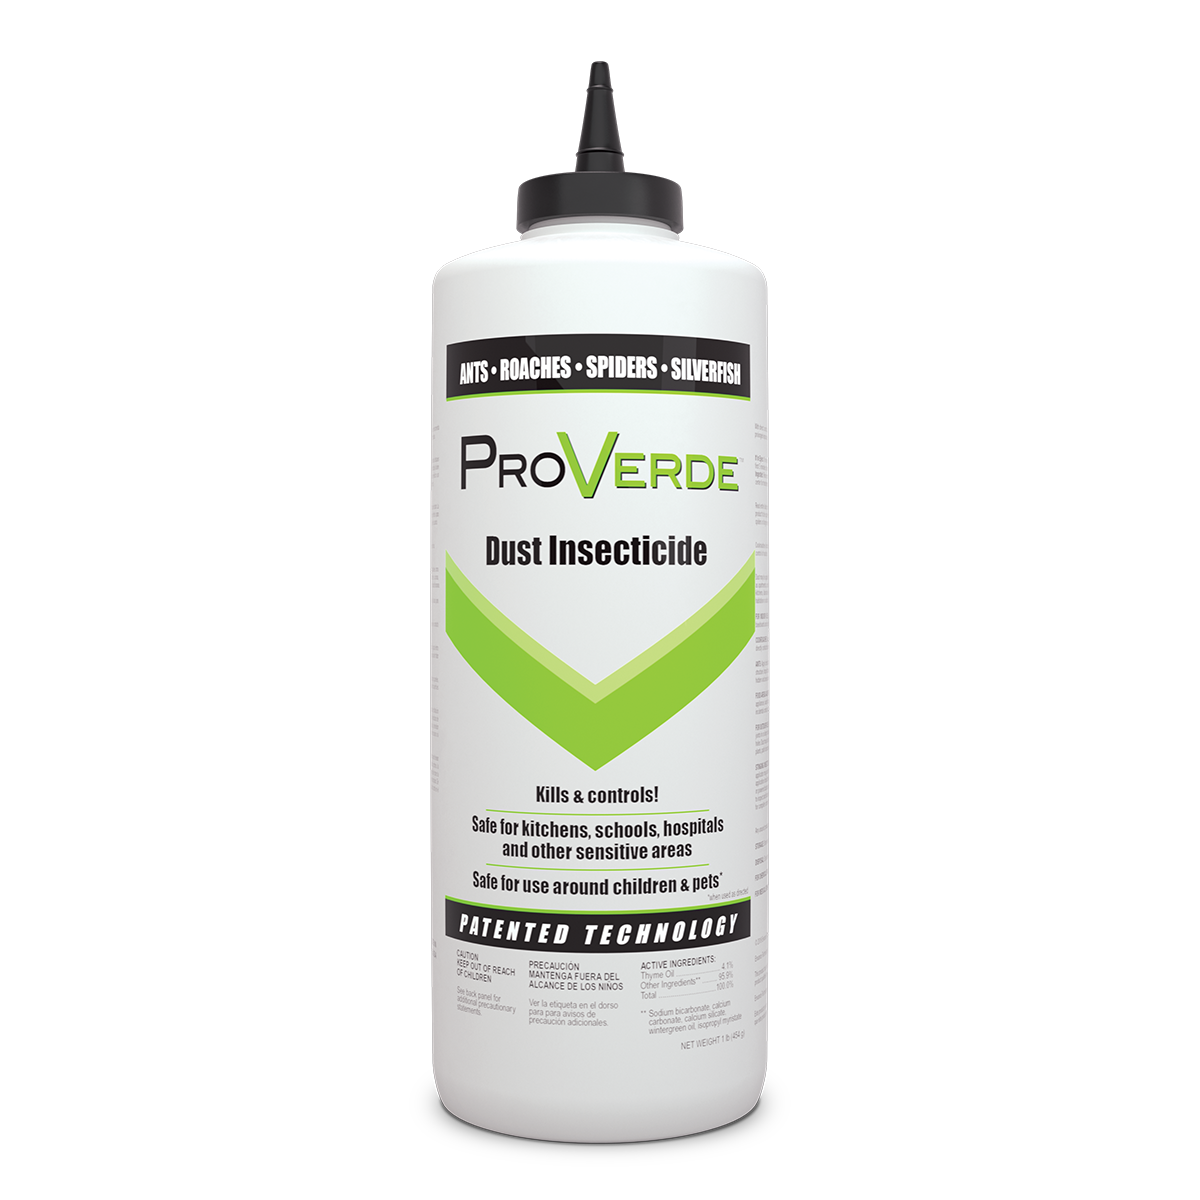 ProVerde Dust Insecticide product package